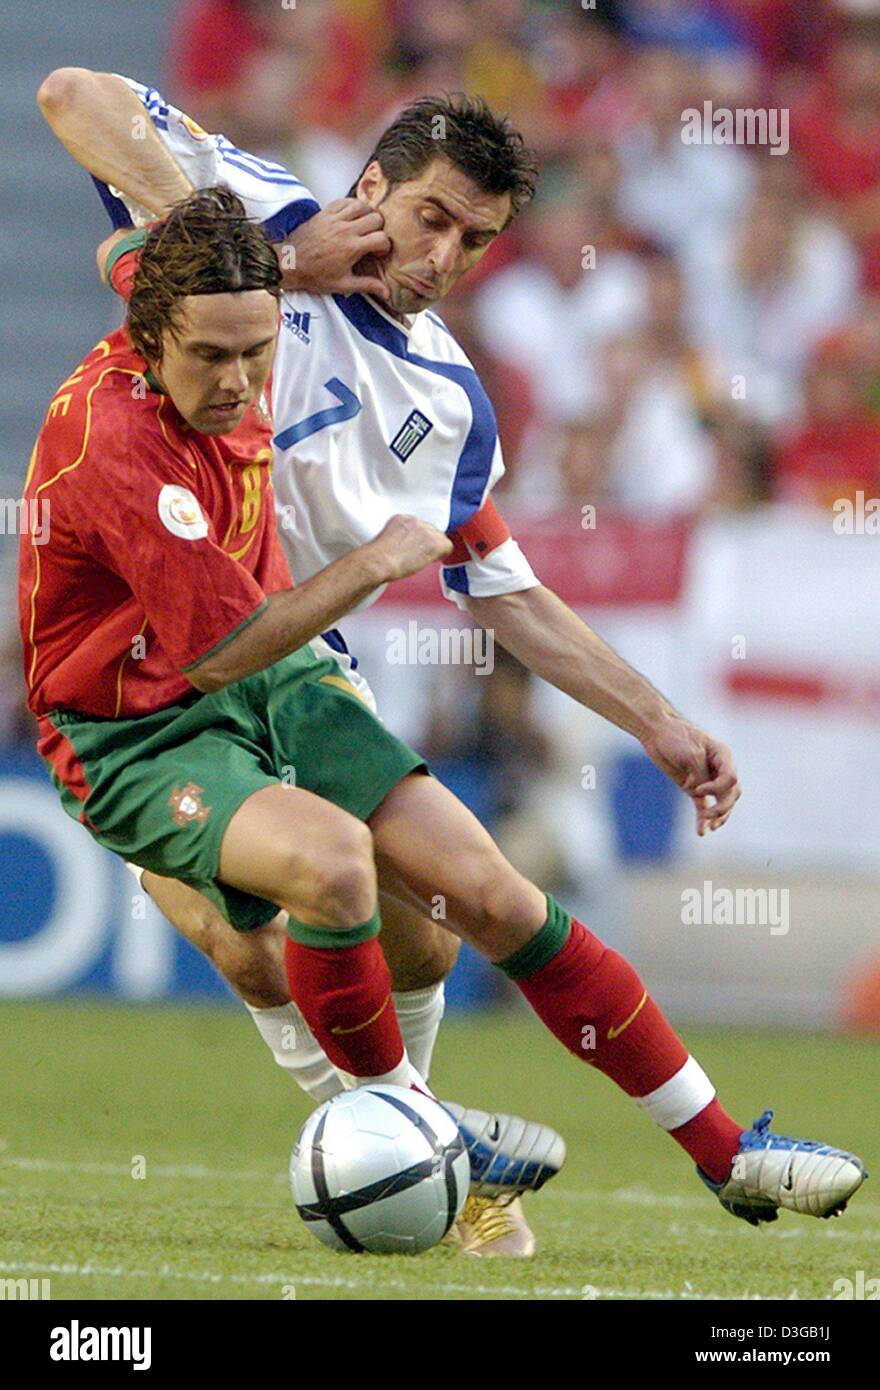 (dpa) - Greek midfielder and team captain Theodoros Zagorakis (R) struggles for the ball with Portuguese midfielder Maniche during the Euro 2004 soccer final between Portugal and Greece at Luz Stadium in Lisbon, Portugal, 4 July 2004. Greece, which had never before won a European Championship or World Cup match, wrote footballing history with their memorable 1-0 victory over Euro 2 Stock Photo